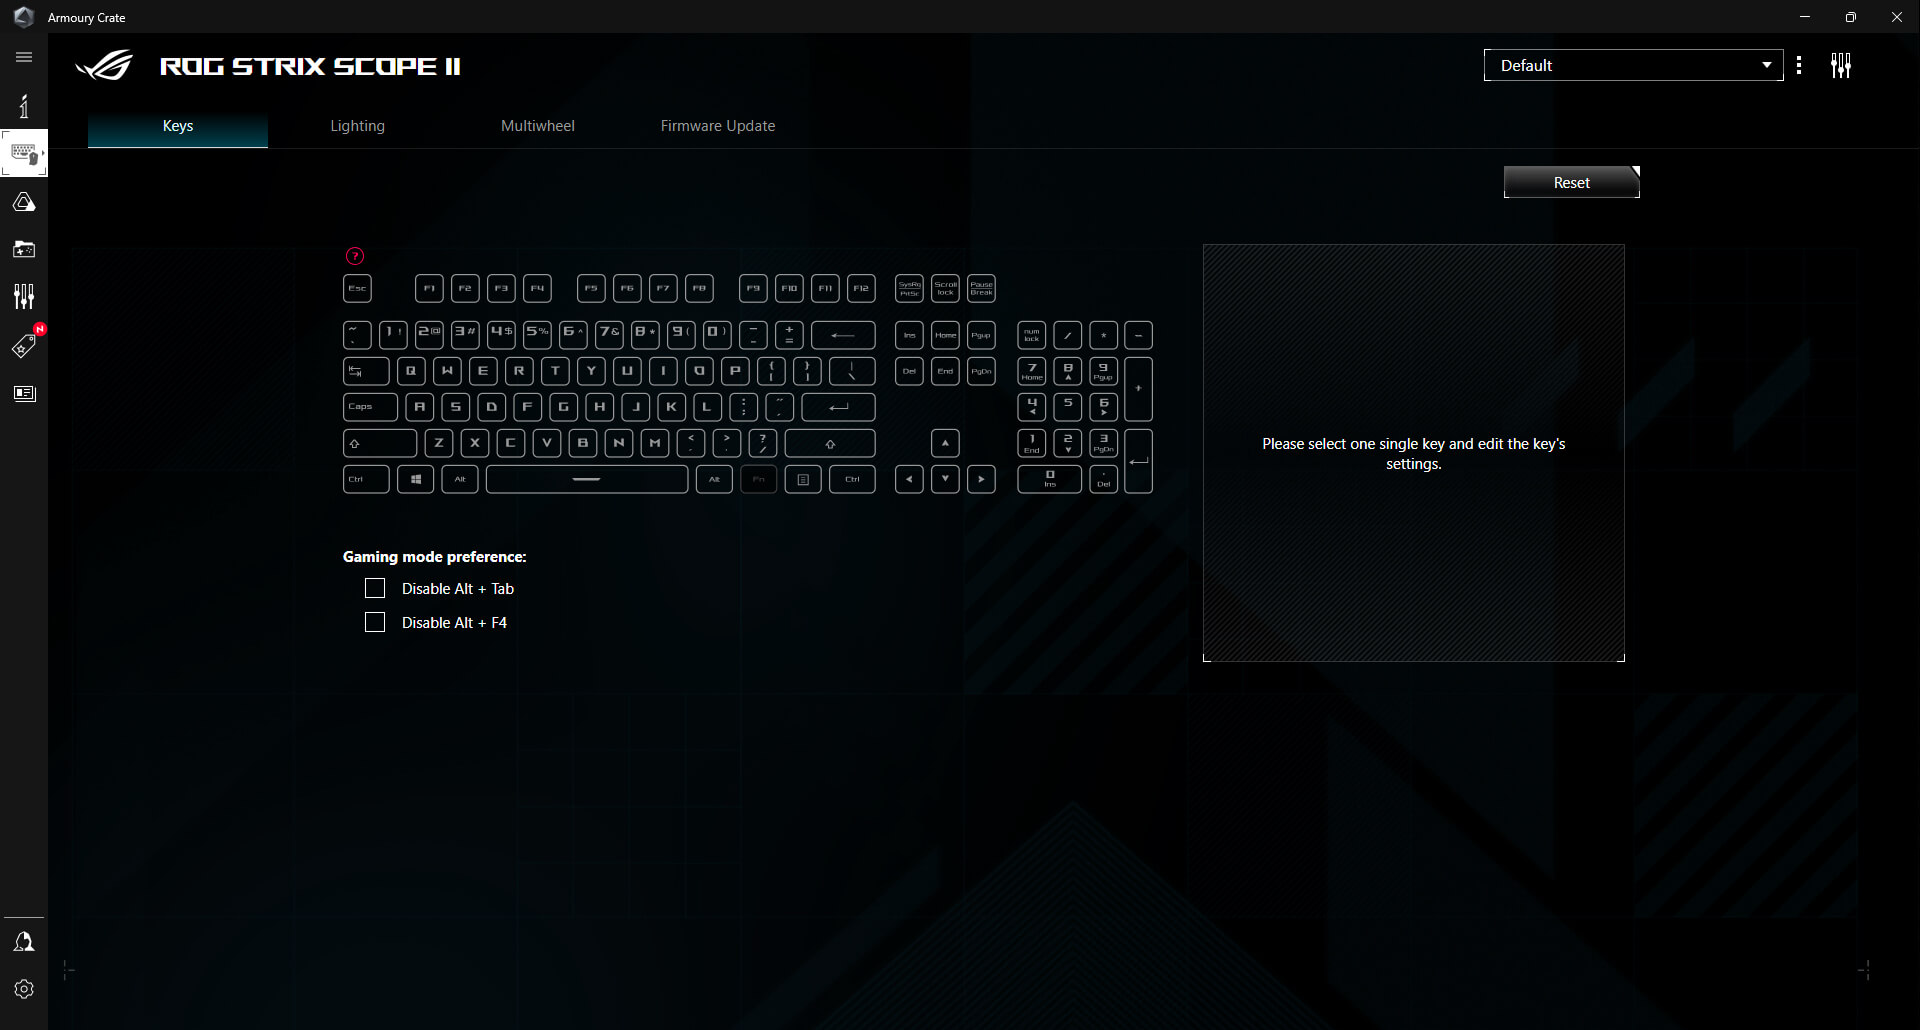 Graphic user interface of Armoury Crate for ROG Strix Scope II